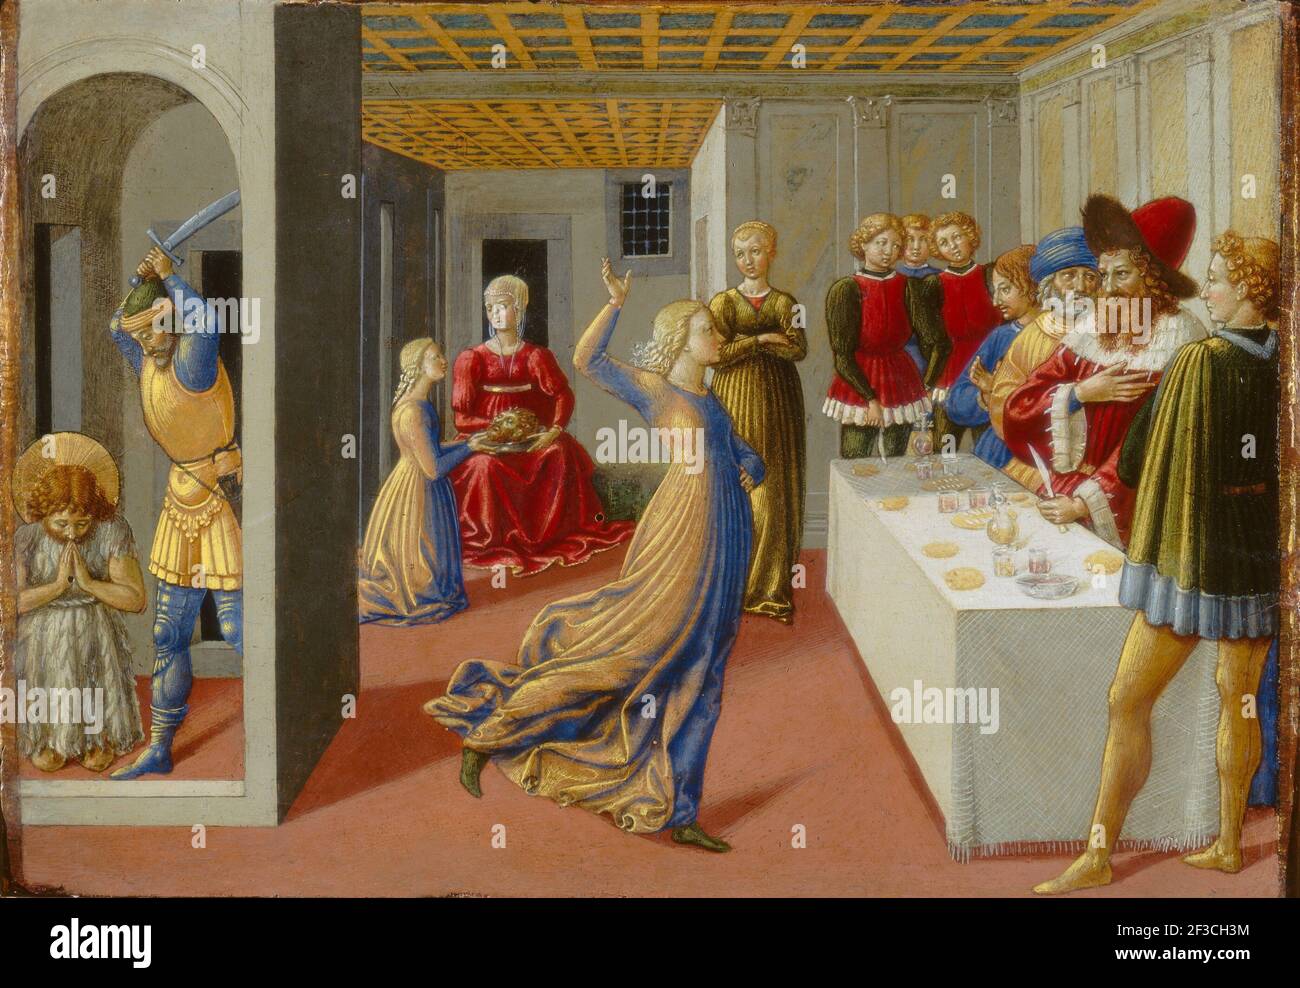 The Feast of Herod and the Beheading of Saint John the Baptist, 1461-1462. Stock Photo